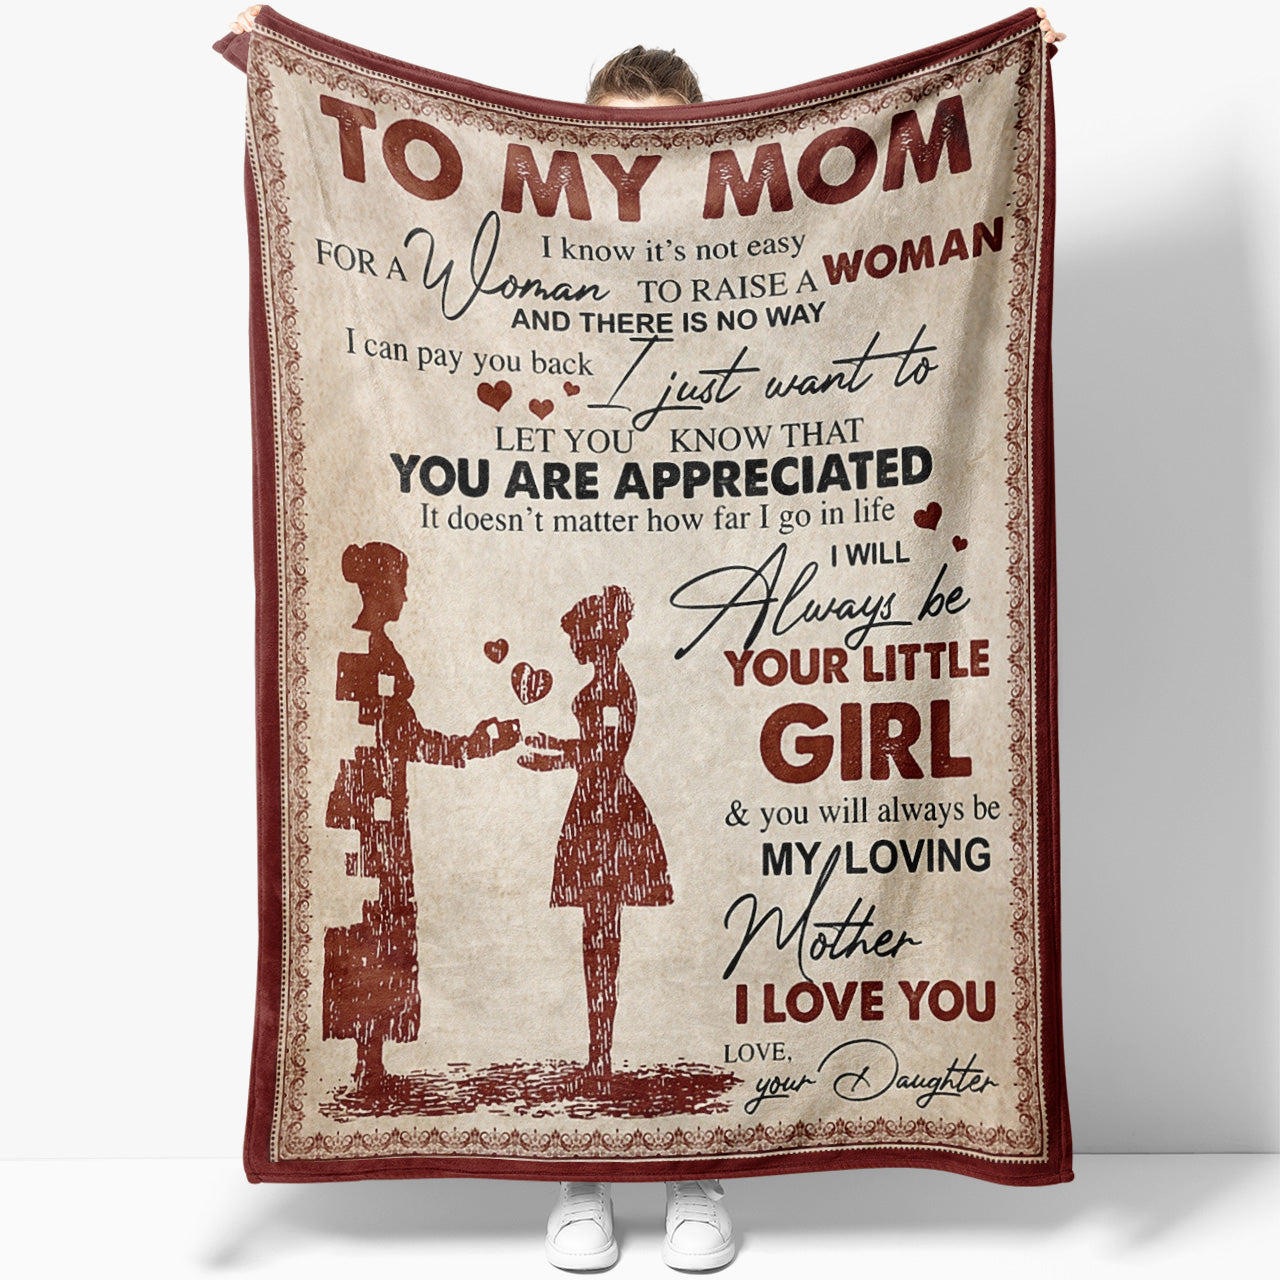 Gifts for Mom, Mom Birthday Gifts, Christmas Blanket Gifts for Mom from  Daughter, Mom Gifts, I Love You Mom Blanket Gifts for Mom, Gift for Mom  from